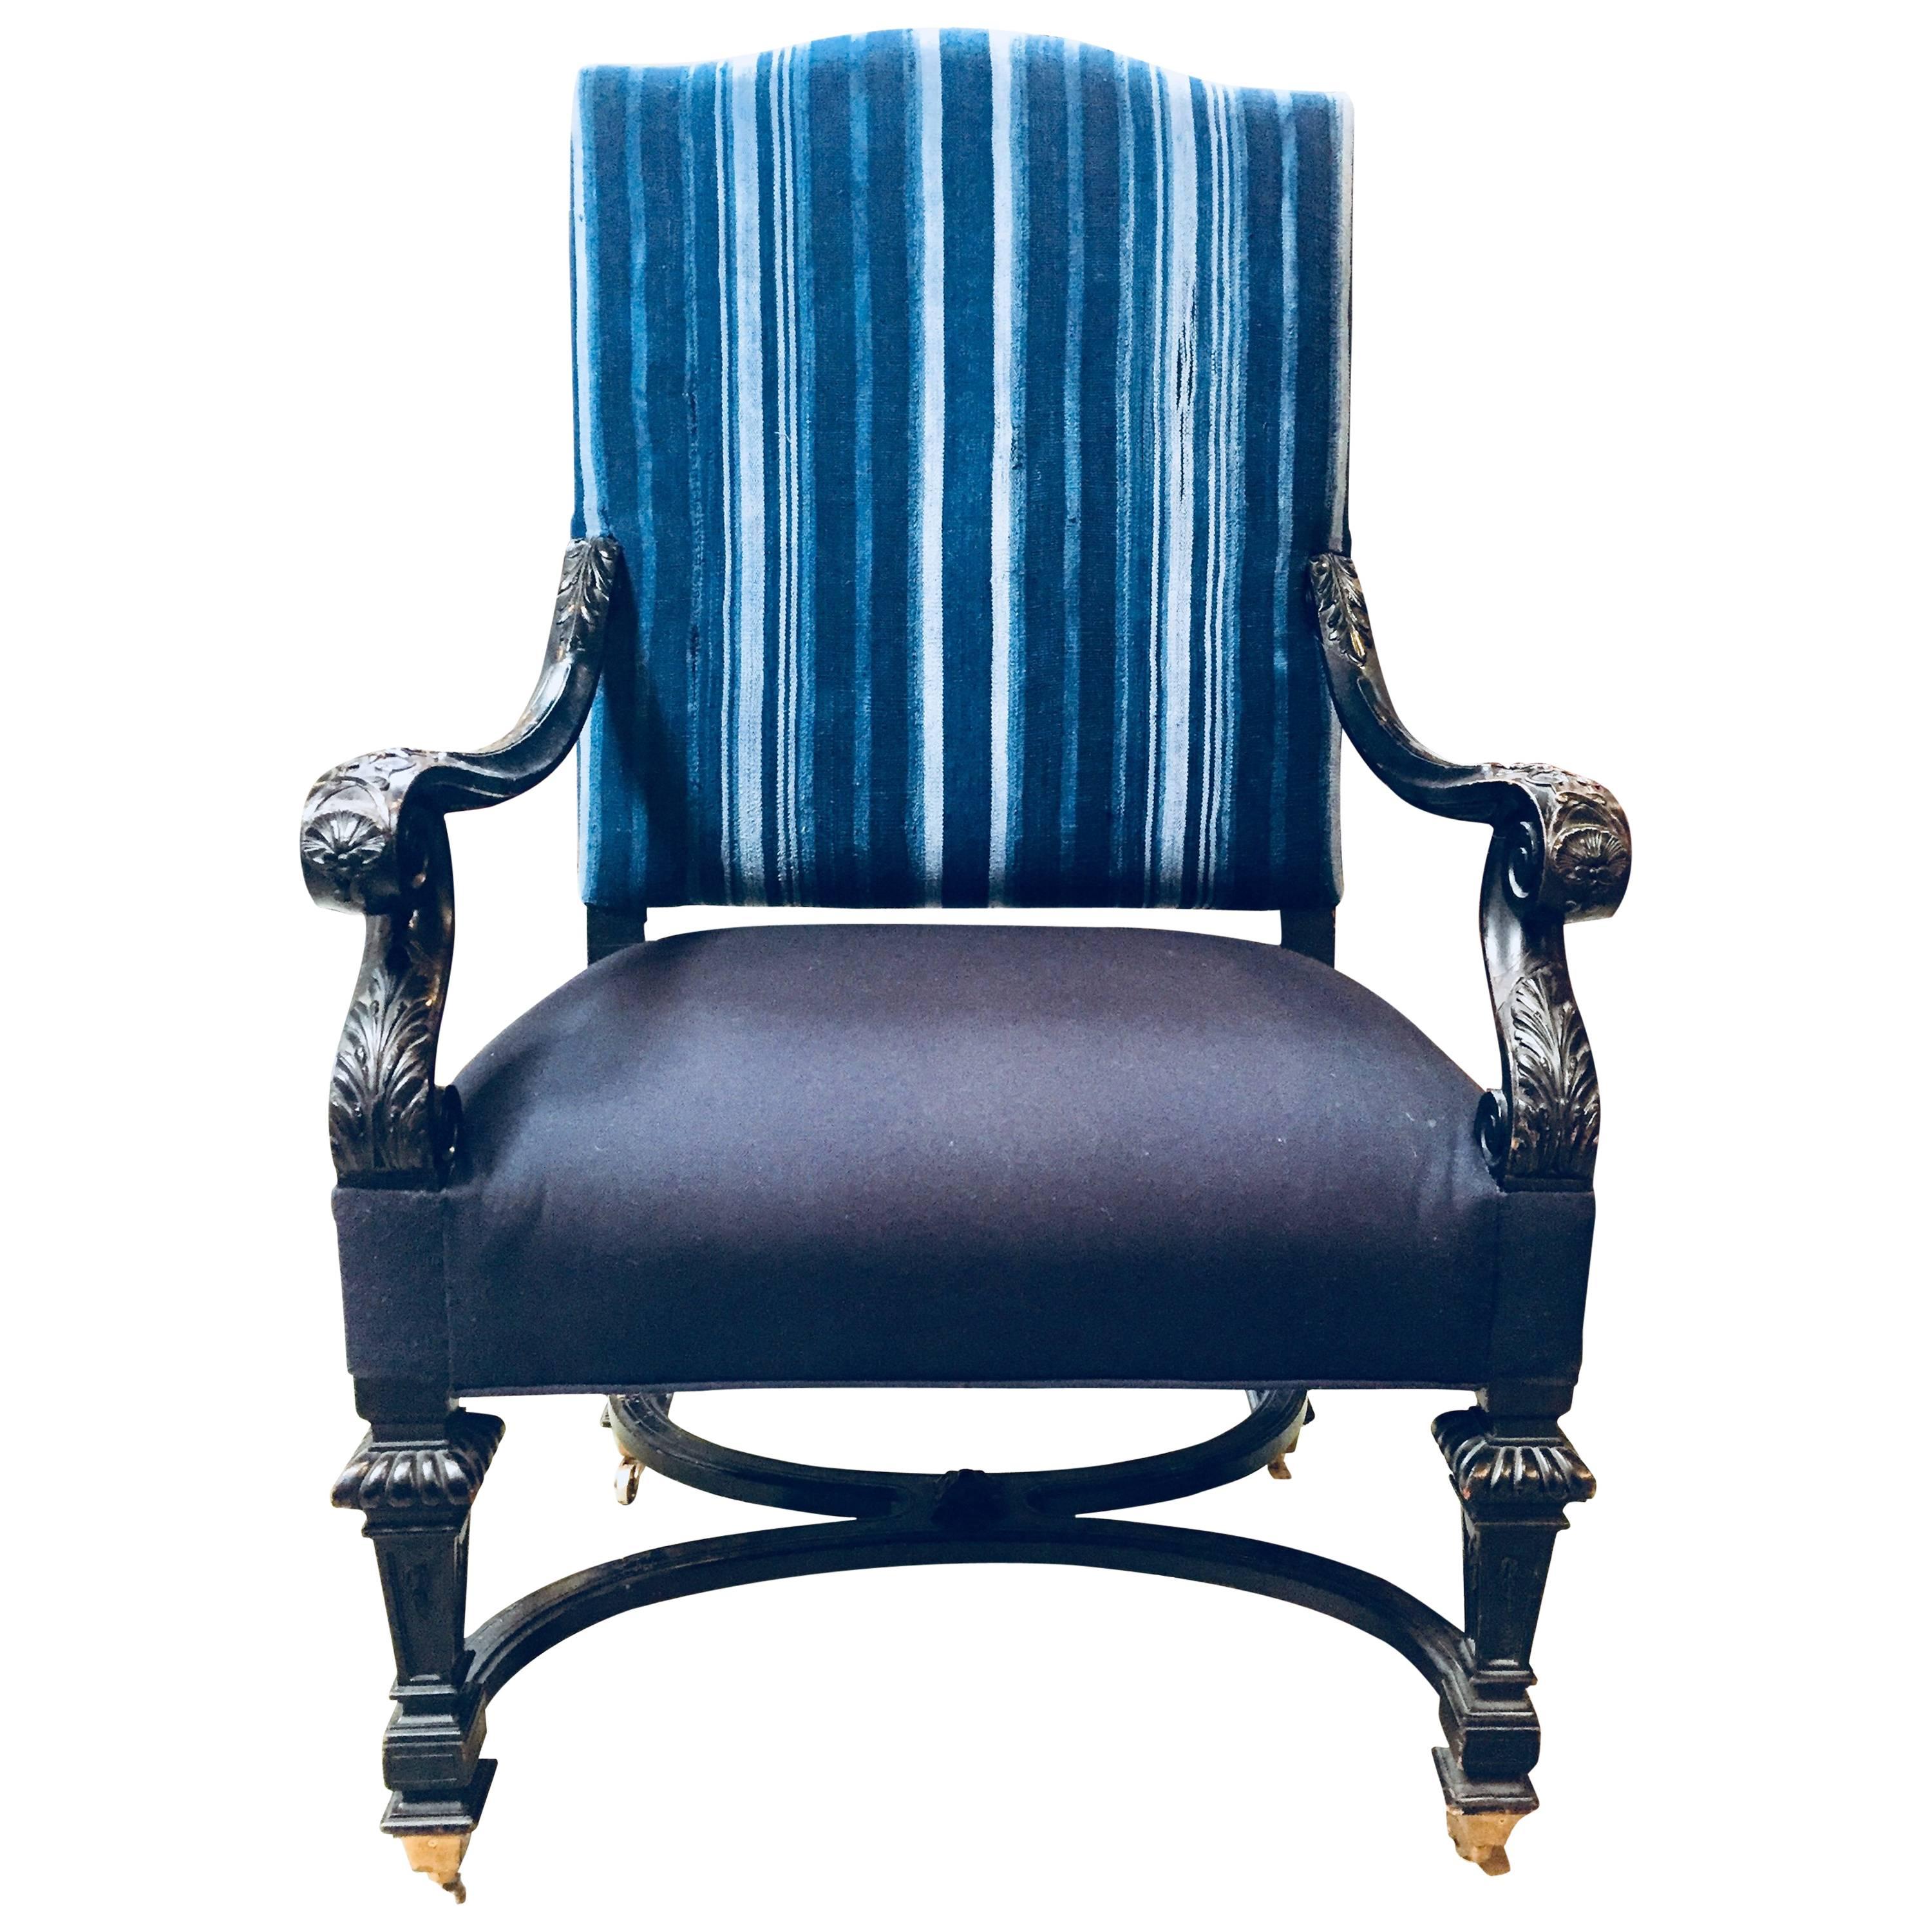 Armchair Covered in Indigo Textile For Sale